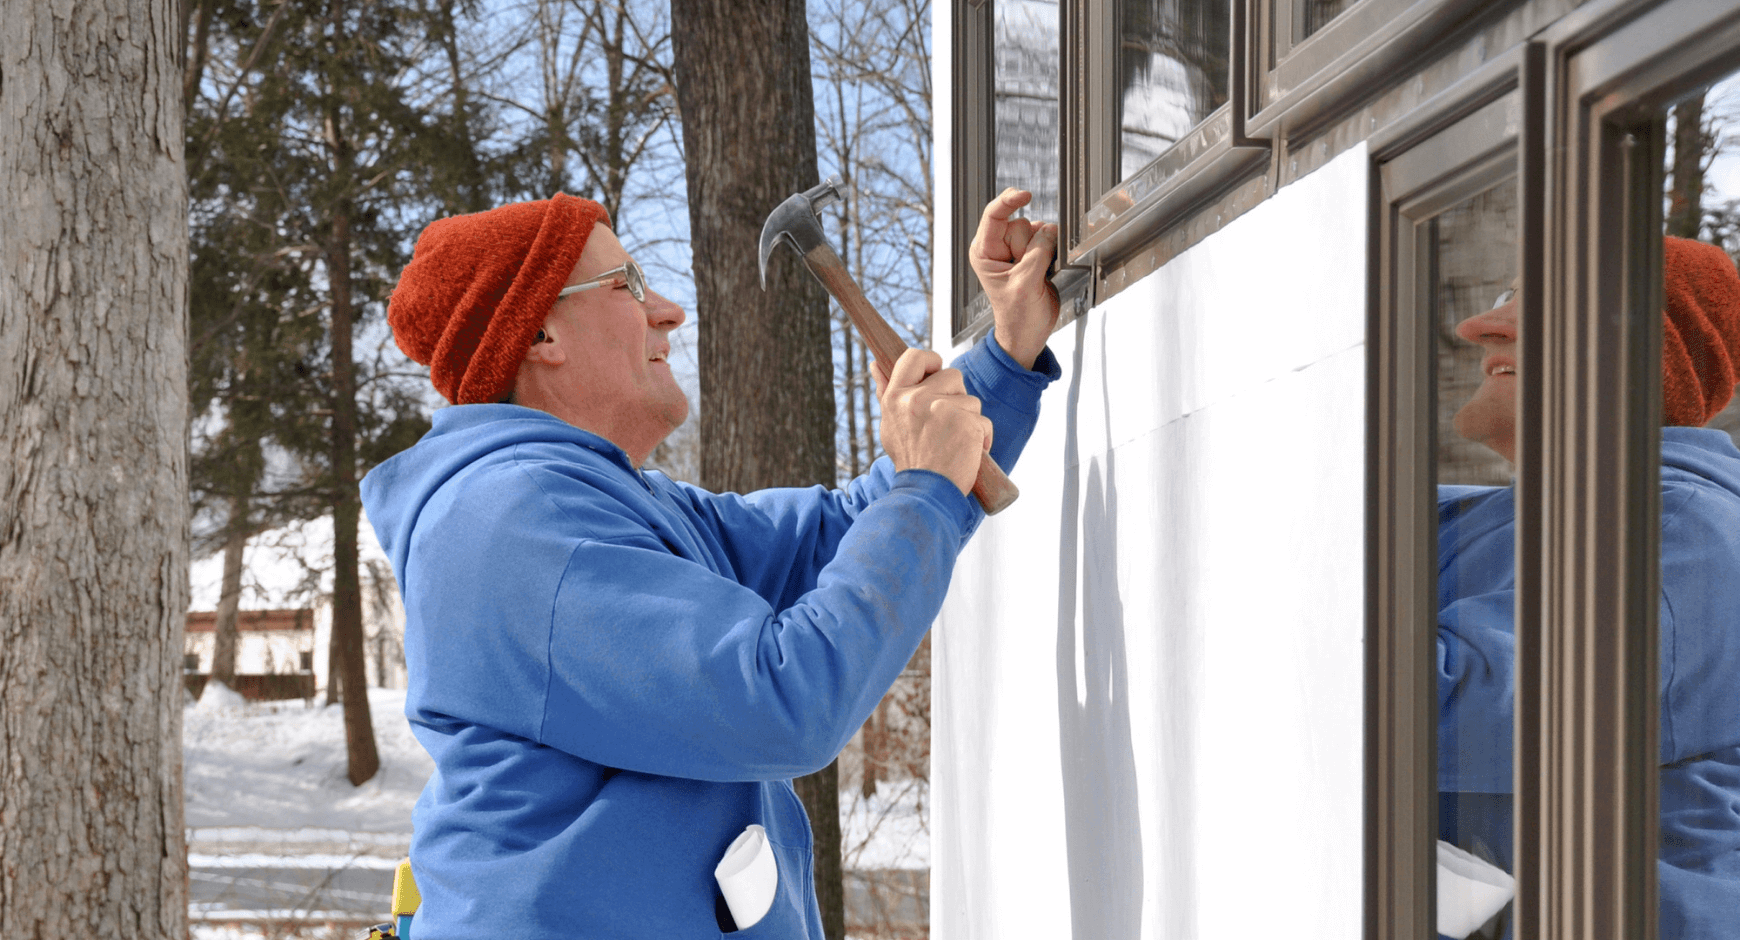 Image of a man replacing windows during the winter in the snow